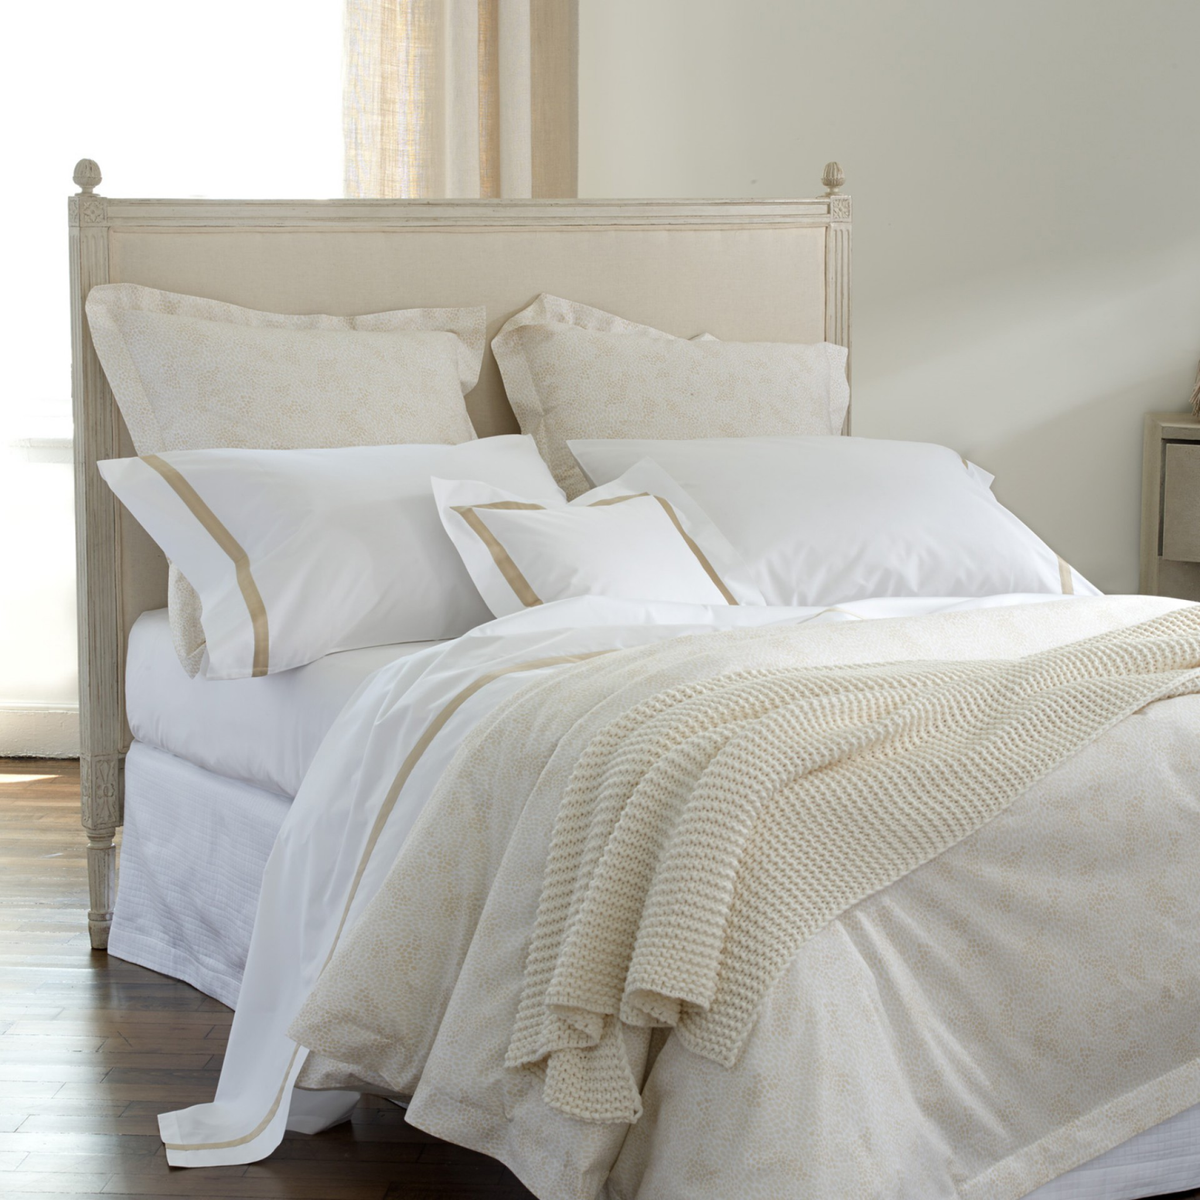 Assorted Collections of Champagne Colored Fine Linen with Matouk Nikita Bedding